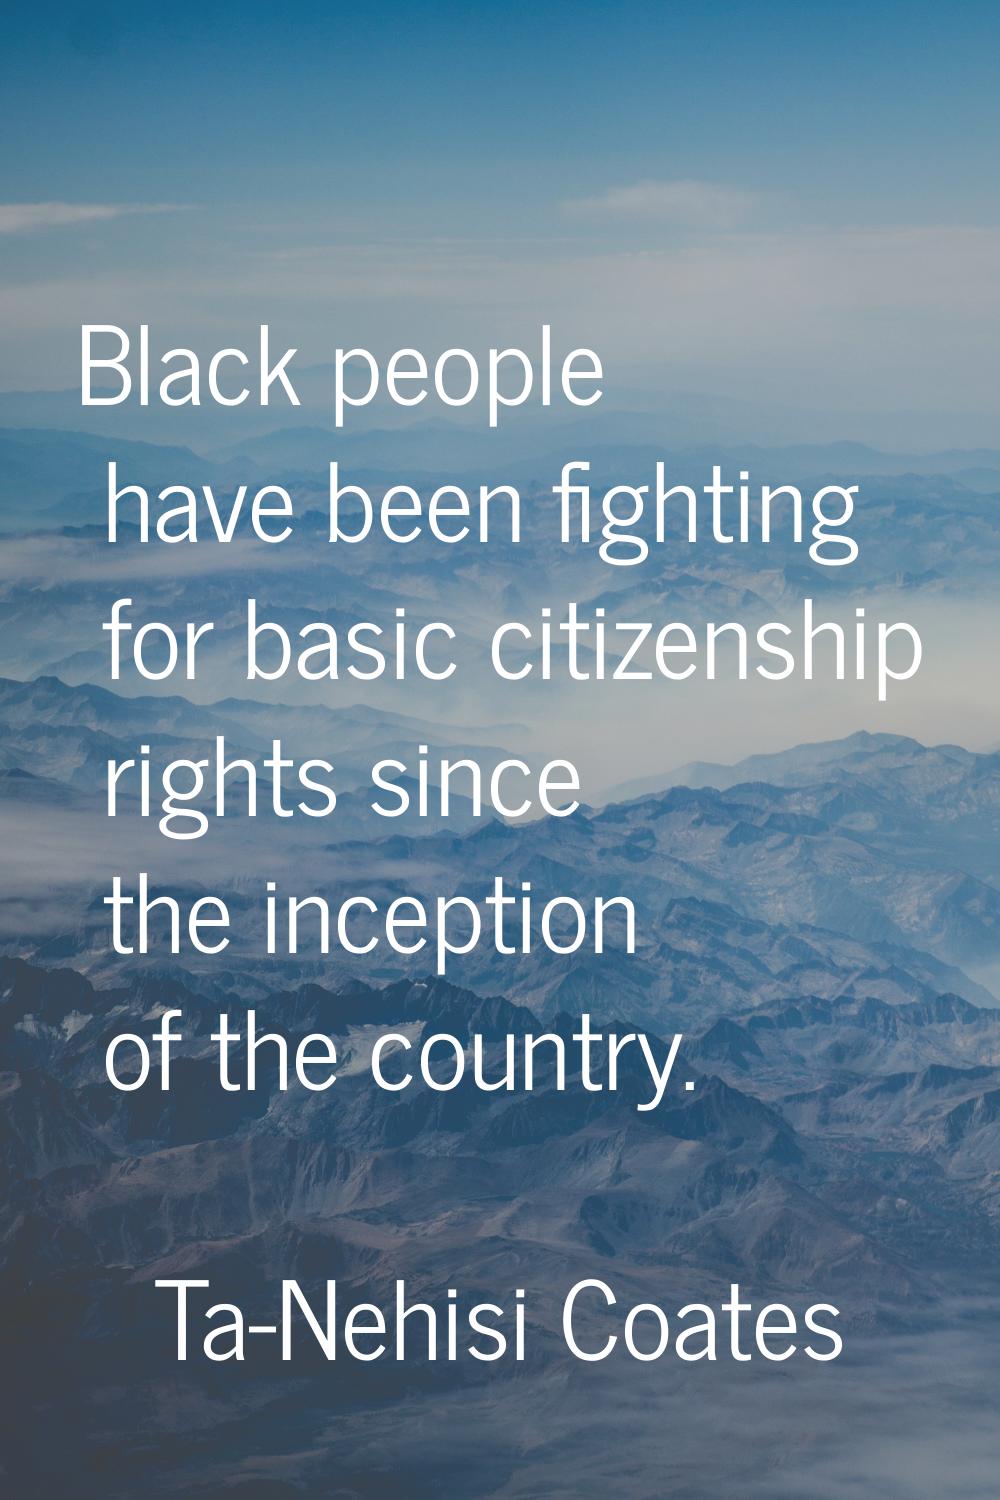 Black people have been fighting for basic citizenship rights since the inception of the country.